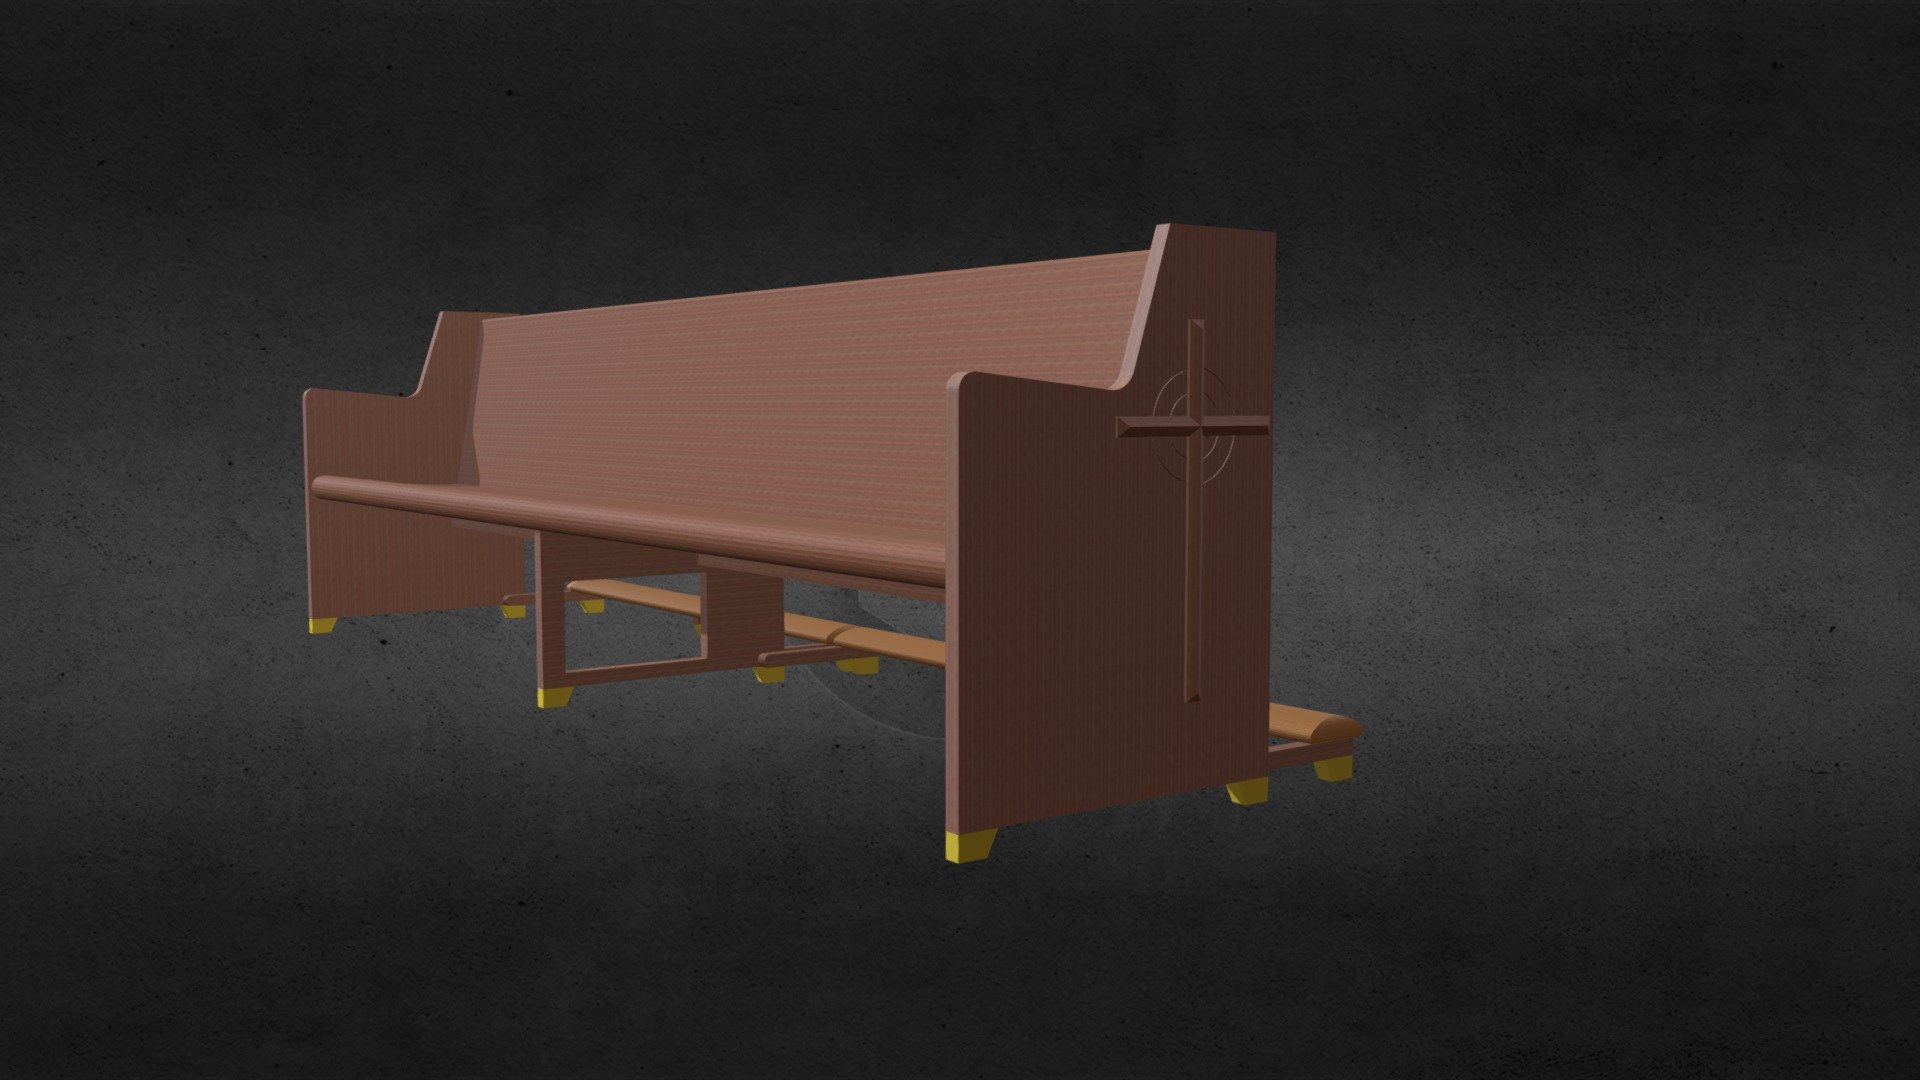 This is just a piece of church furniture that I modeled a while ago.
It is part of a whole series of furniture, decorative elements, even religious images framed in 3D and that I will be uploading soon - Church Bench - 3D model by Henry Shepard (@quiqueshepard) 3d model